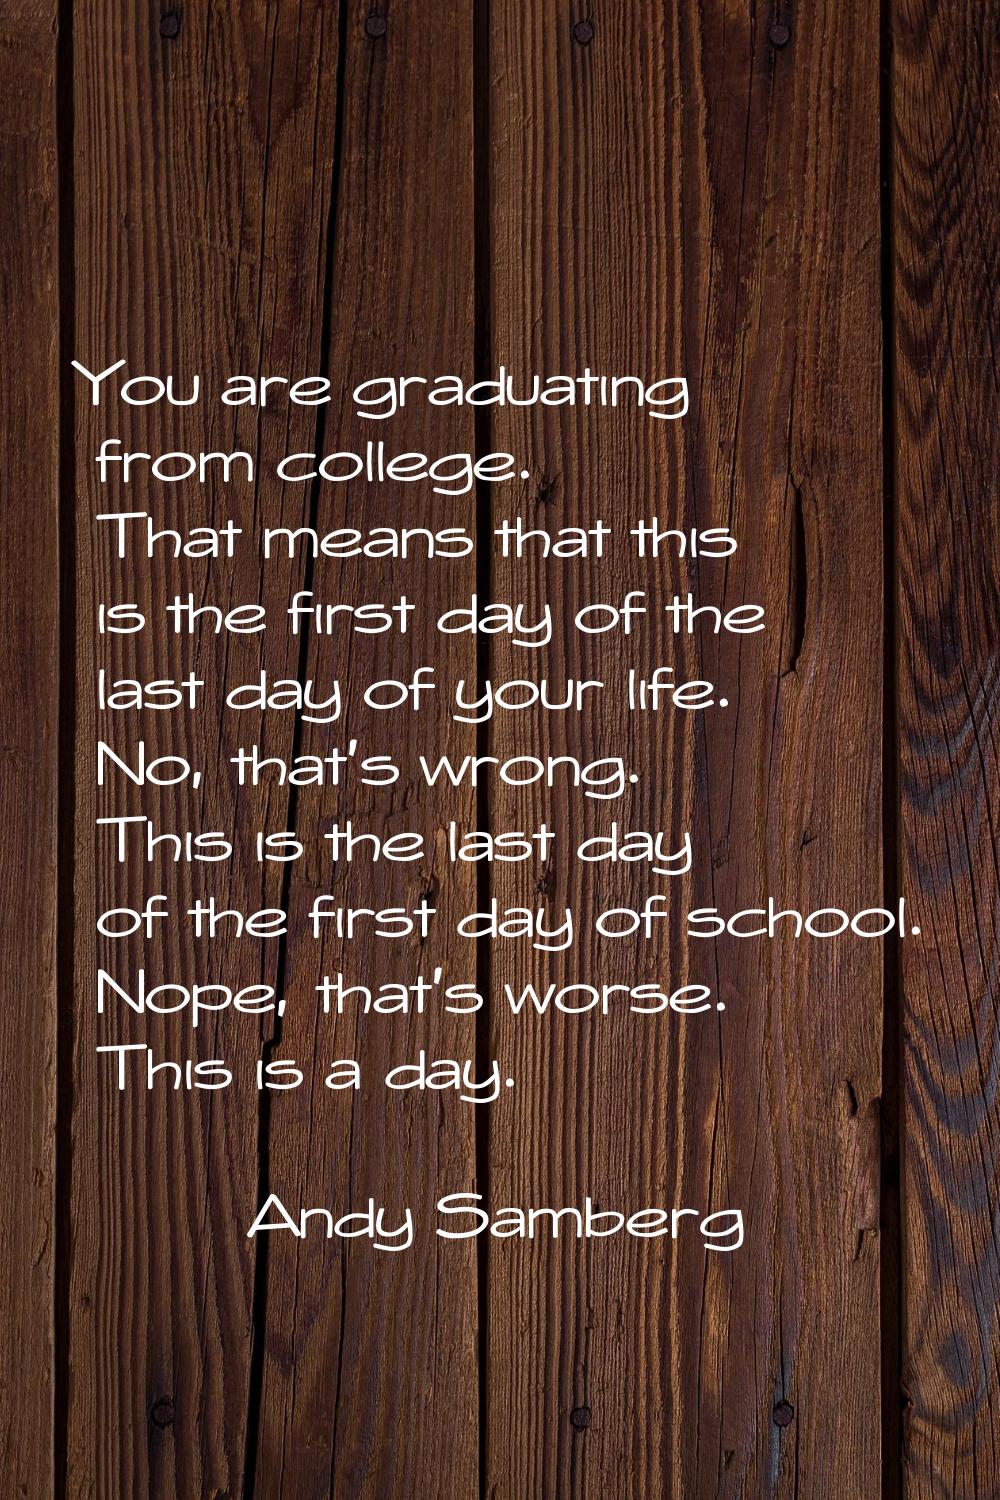 You are graduating from college. That means that this is the first day of the last day of your life